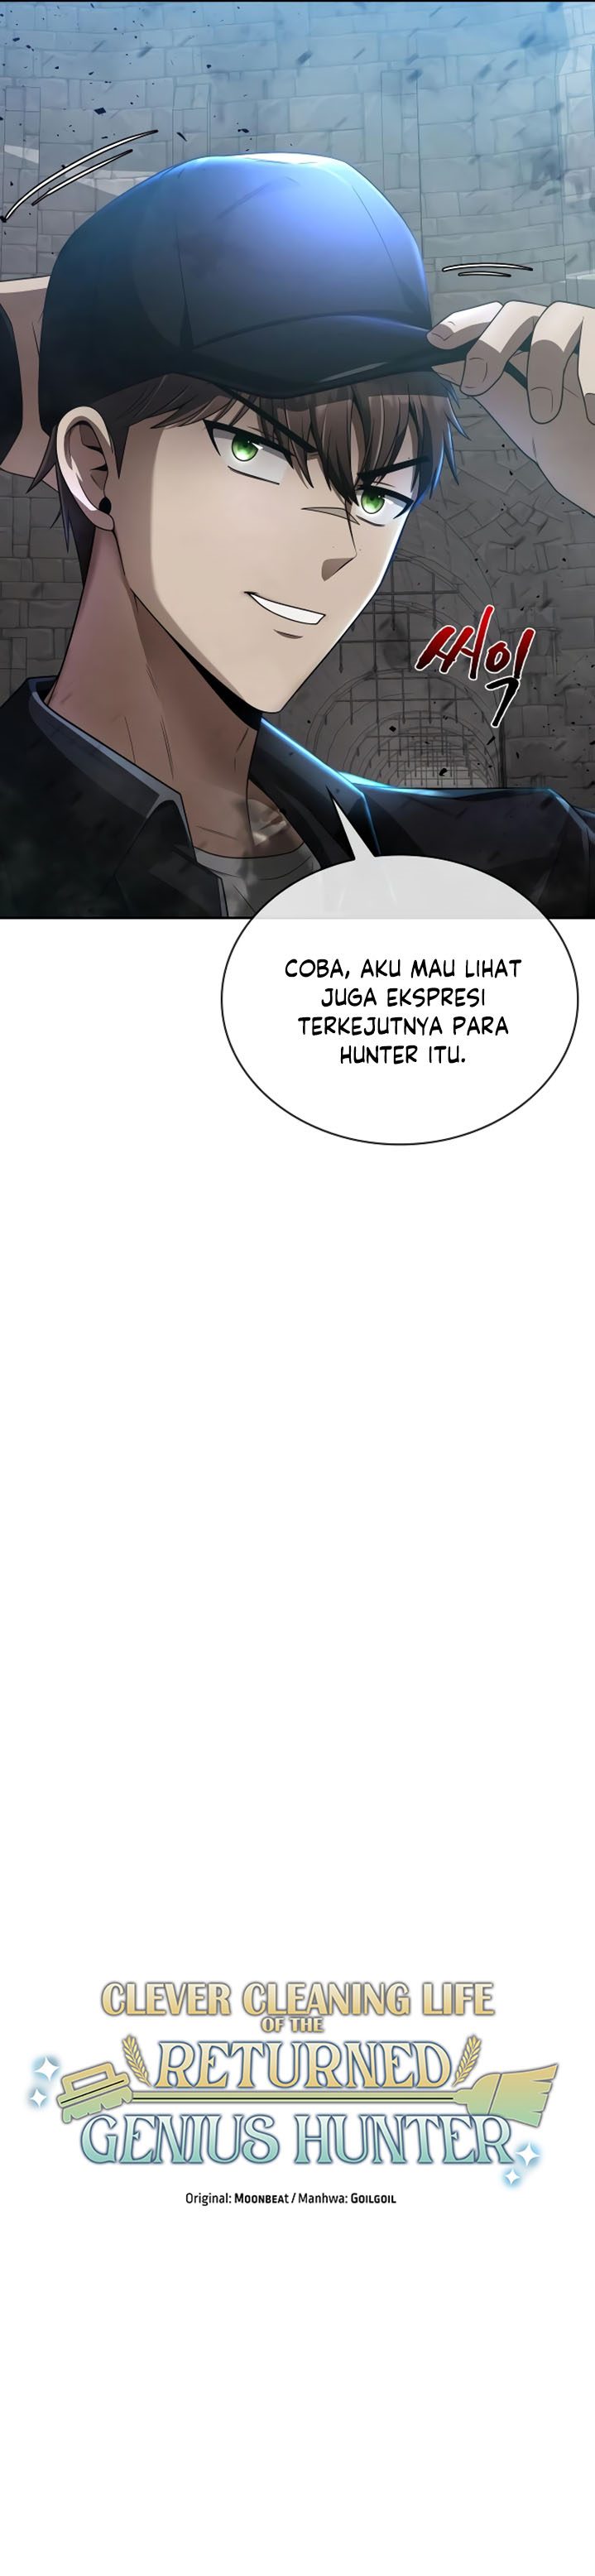 Dilarang COPAS - situs resmi www.mangacanblog.com - Komik clever cleaning life of the returned genius hunter 011 - chapter 11 12 Indonesia clever cleaning life of the returned genius hunter 011 - chapter 11 Terbaru 17|Baca Manga Komik Indonesia|Mangacan